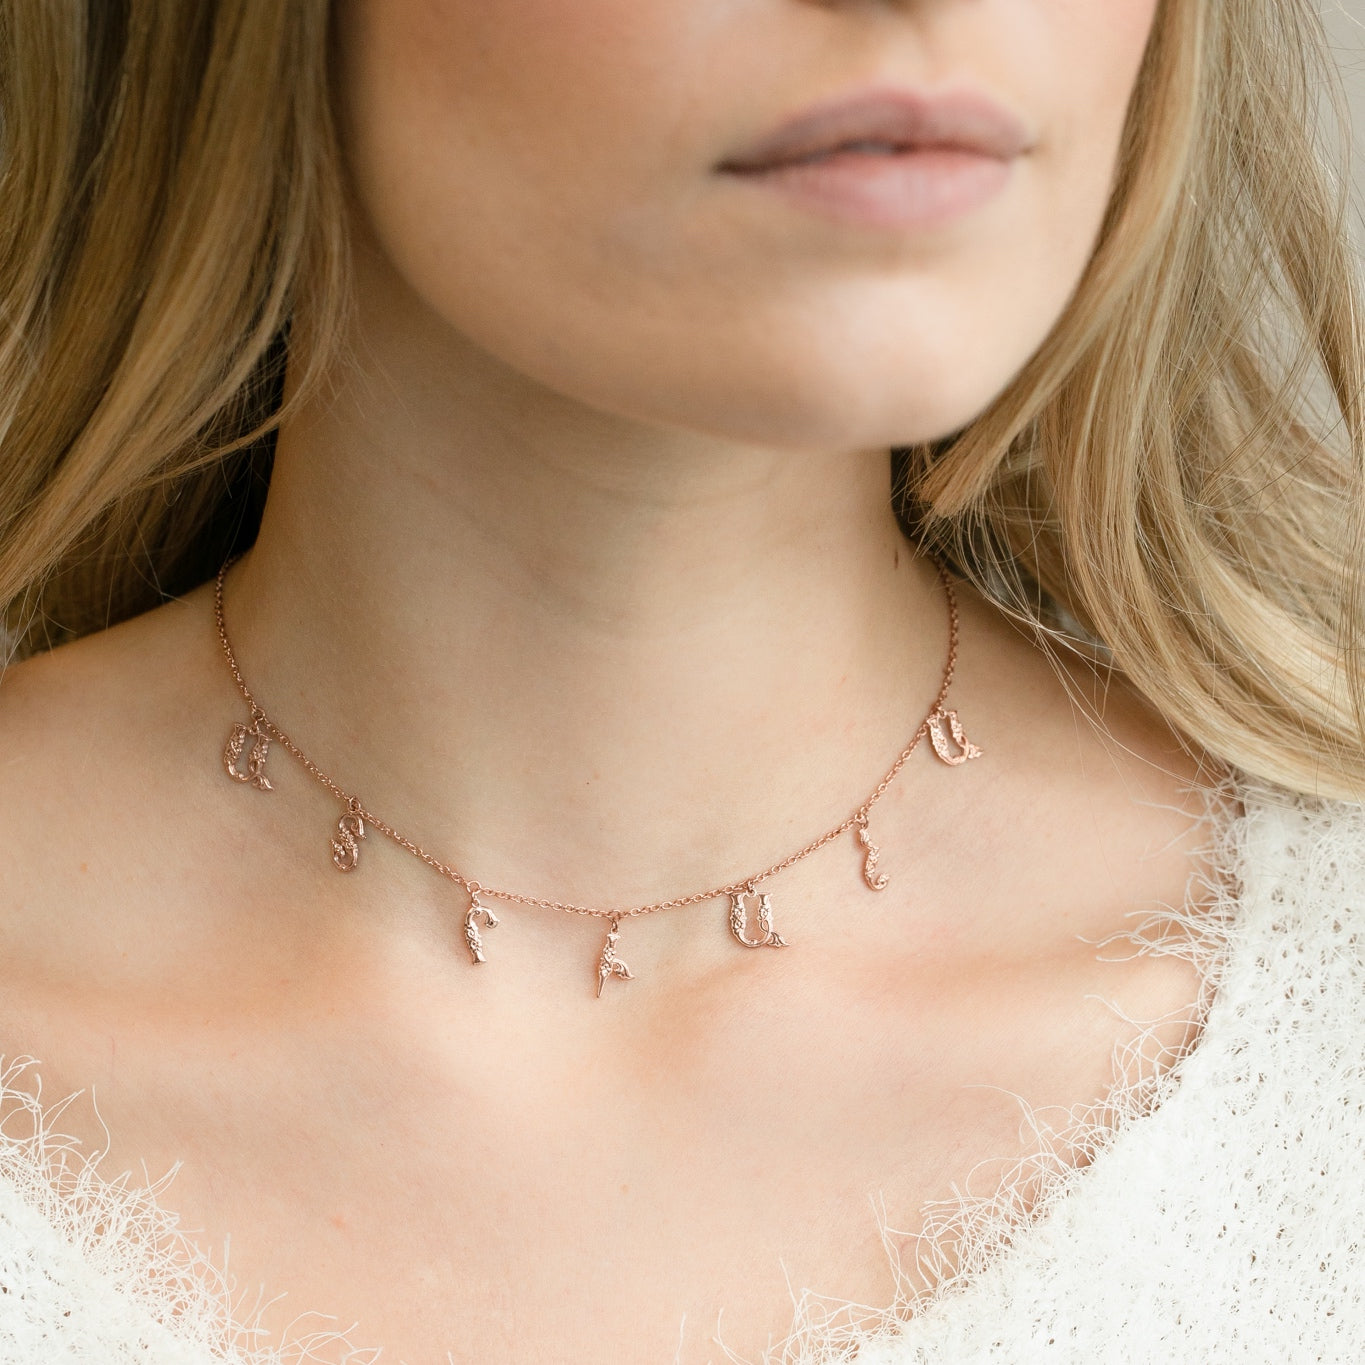 Armenian Spaced Seven-Letter Name Necklace on a Model